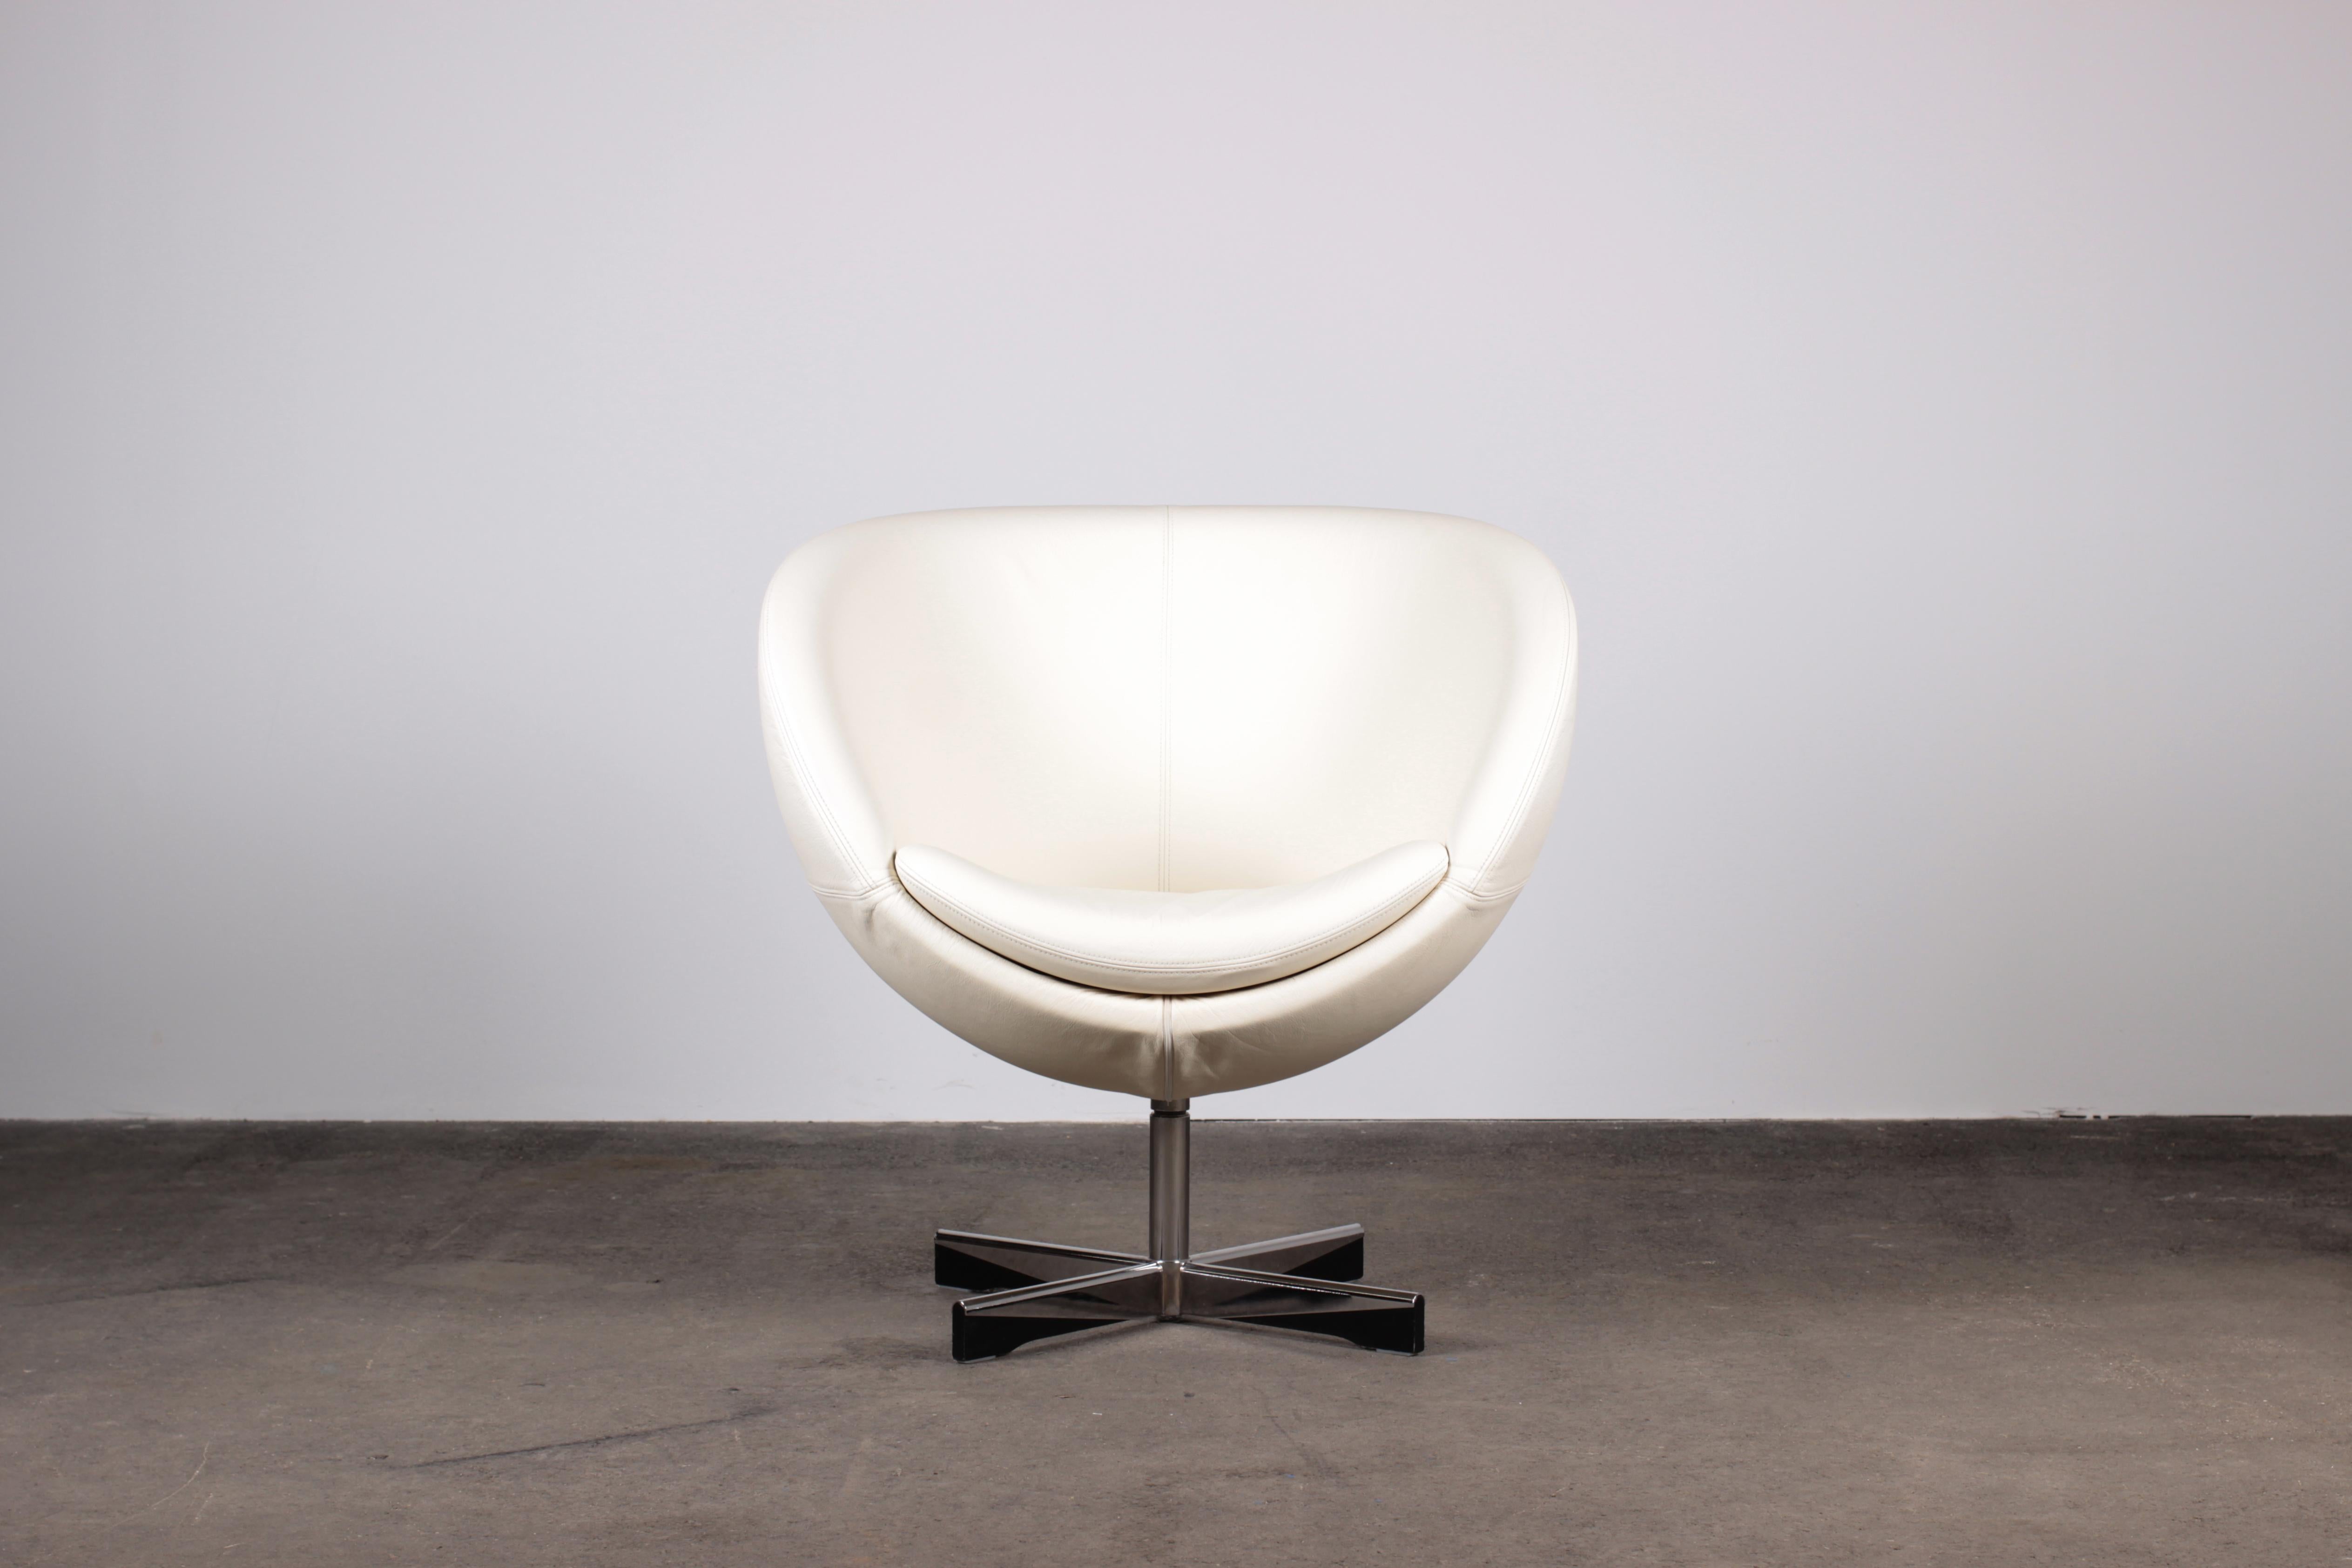 Scandinavian Modern enters the Space Age in 1965 with the launch of the Planet Armchair. Designed by Sven Ivar Dysthe and manufactured by Stokke (now Varier) in Norway. The Planet has now become an enduring icon of Scandinavian design with a